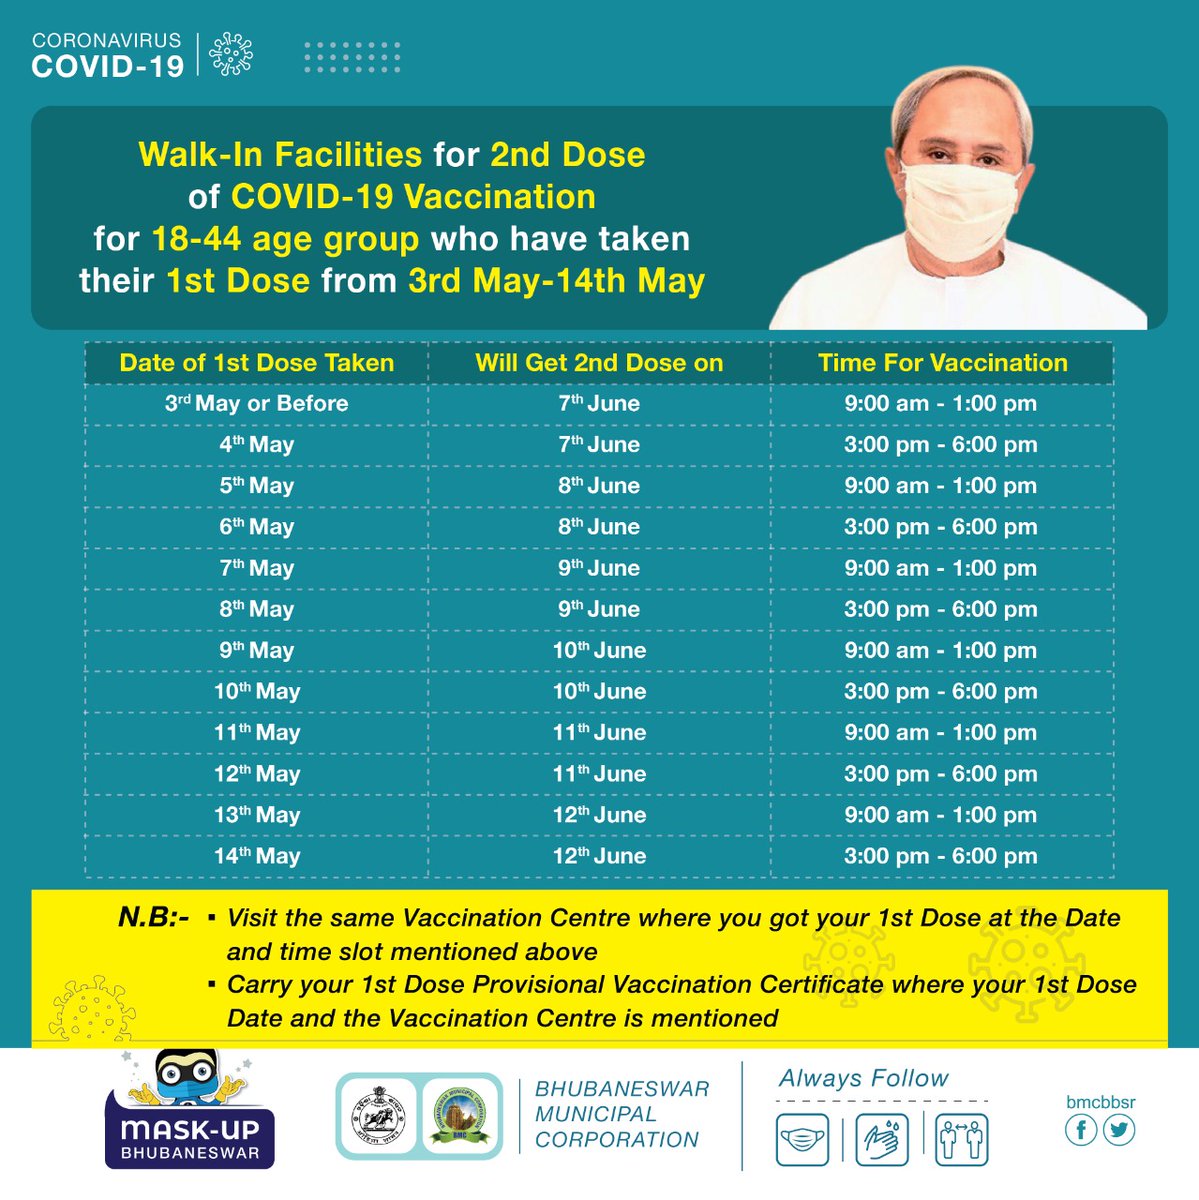 📢 Prioritizing the 2nd Dose of COVID Vaccination for 18-44 age group, BMC has introduced Walk-In facilities. For the citizens, aged 18-44 who have taken their 1st dose from 3rd May-14th May please go through the steps mentioned below & get Vaccinated easily. #BMCCares